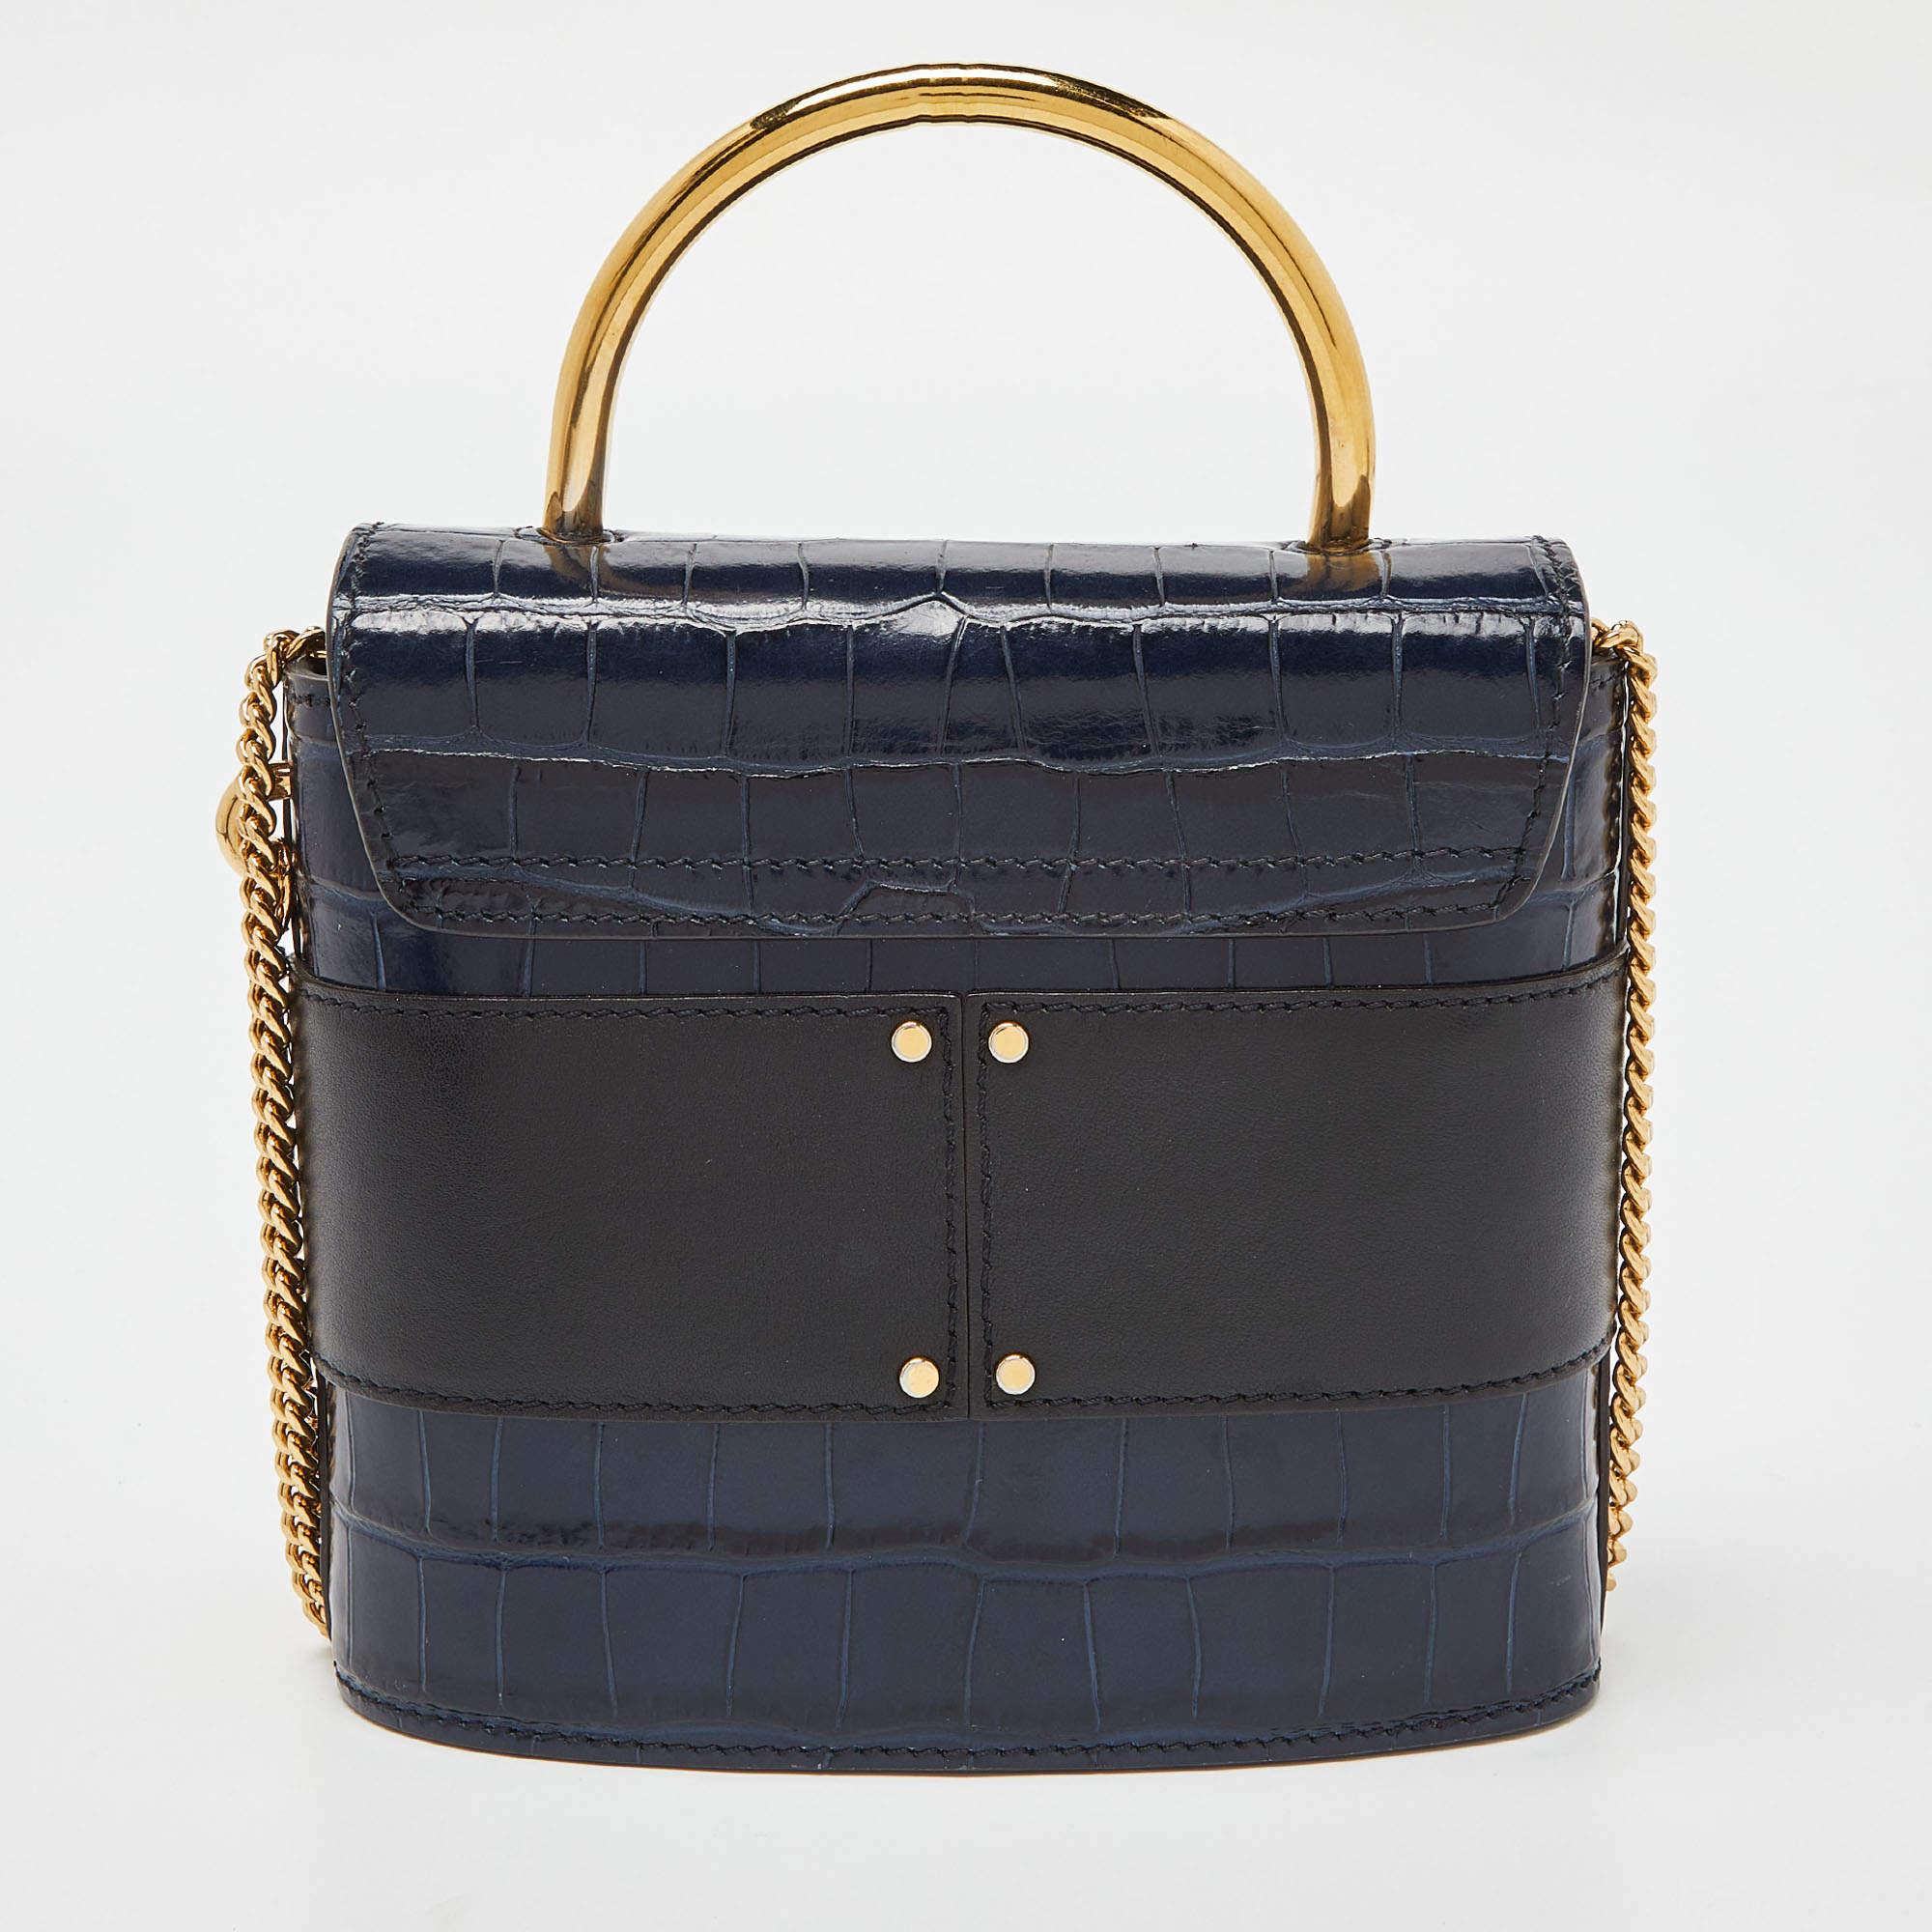 With an affinity to create chic bags that look like works of art, Chloe brings this Aby Lock bag that is just a masterpiece. Crafted from croc-embossed leather, it presents itself in a blue and black hue. It is styled with a front flap that carries